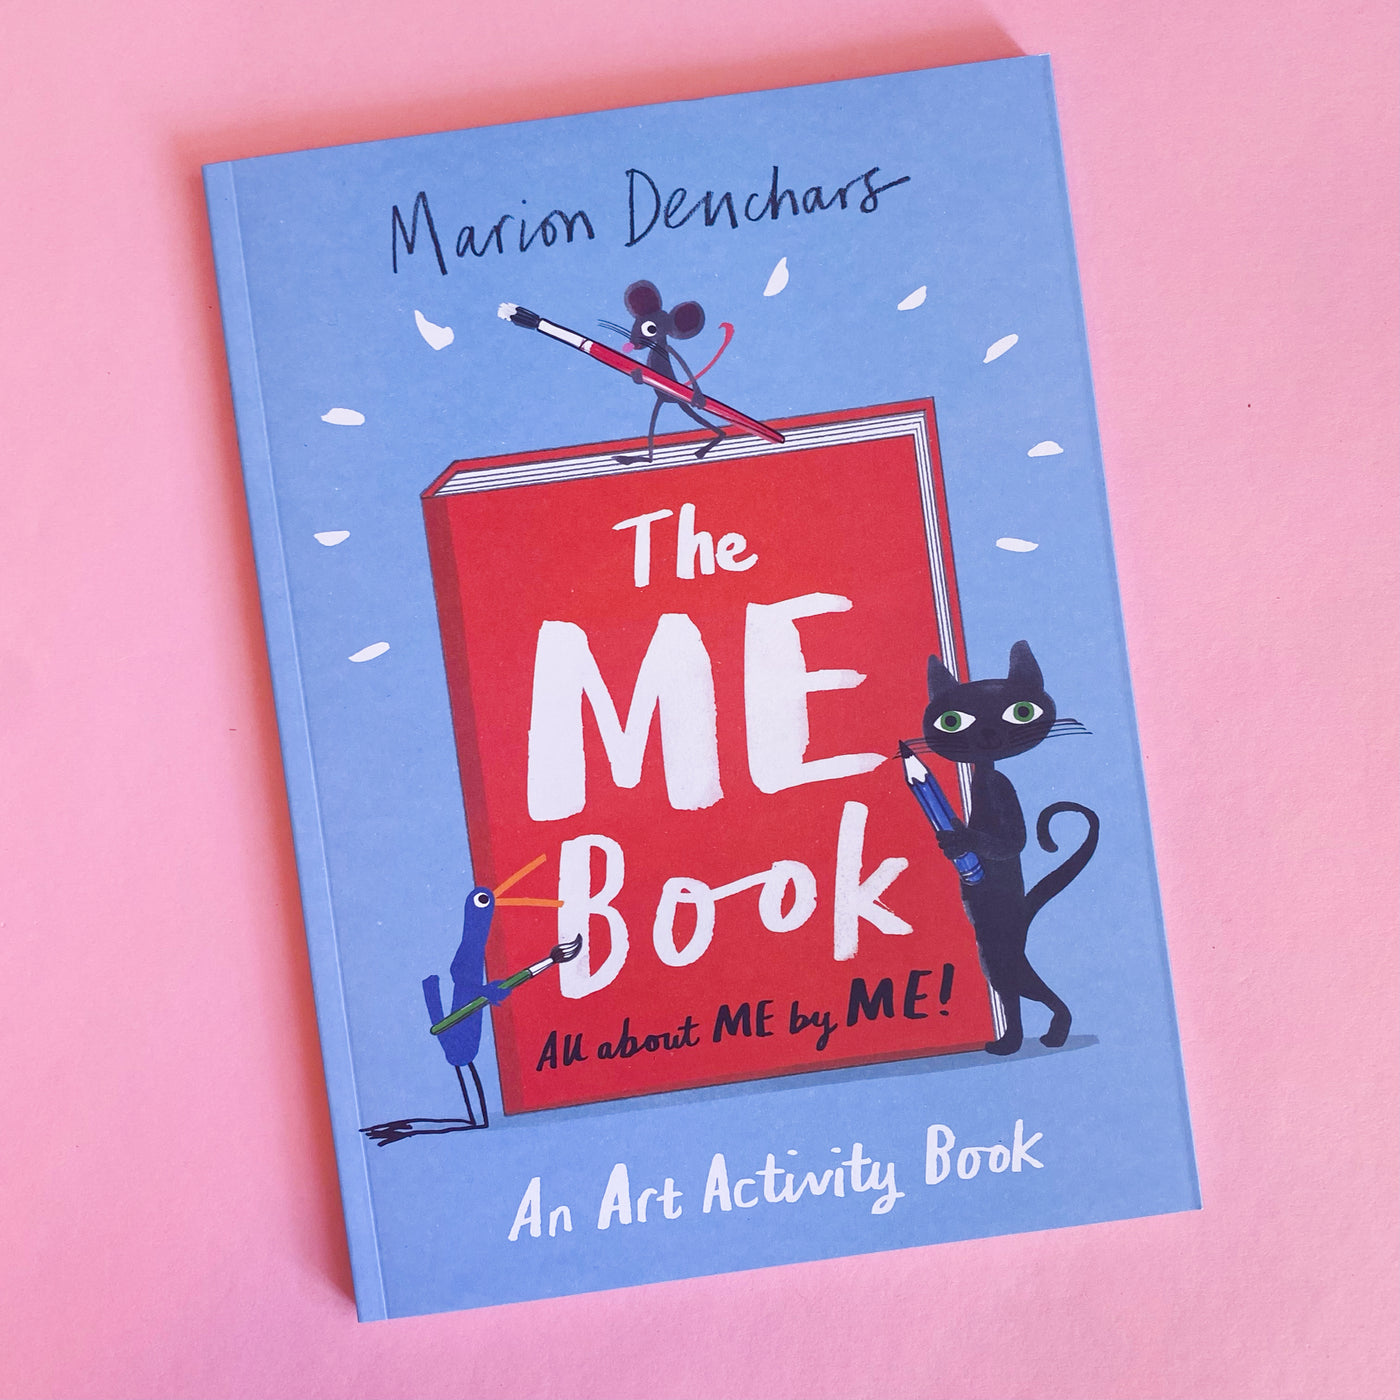 The ME Book: An Art Activity Book by Marion Deuchars